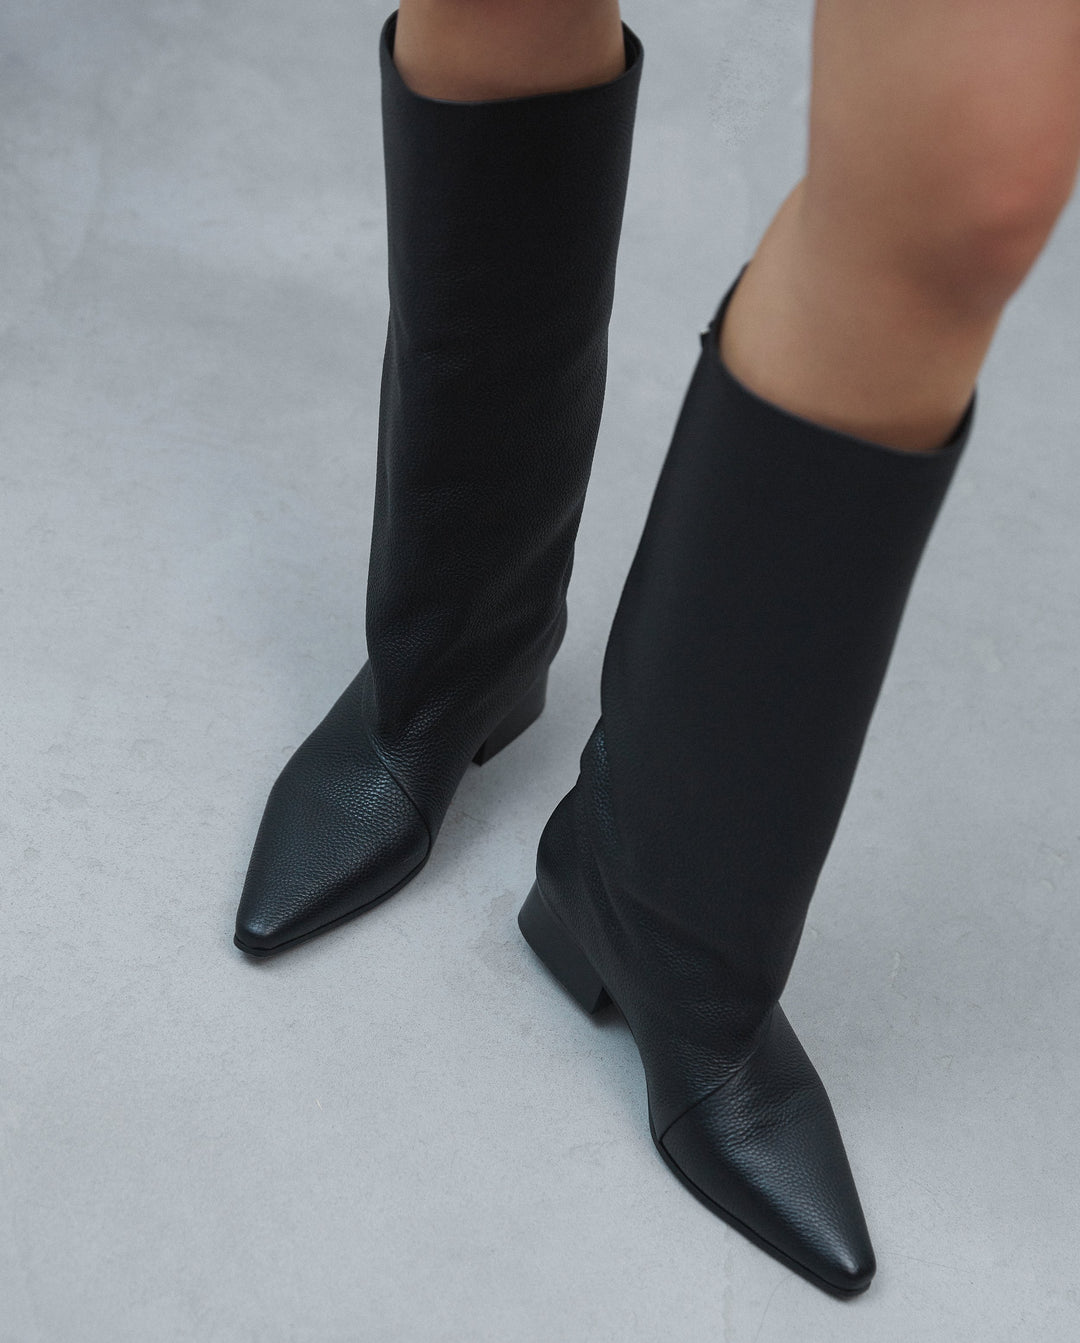 Women's black leather boots with a wide shaft by Estro - model in a complete ensemble.